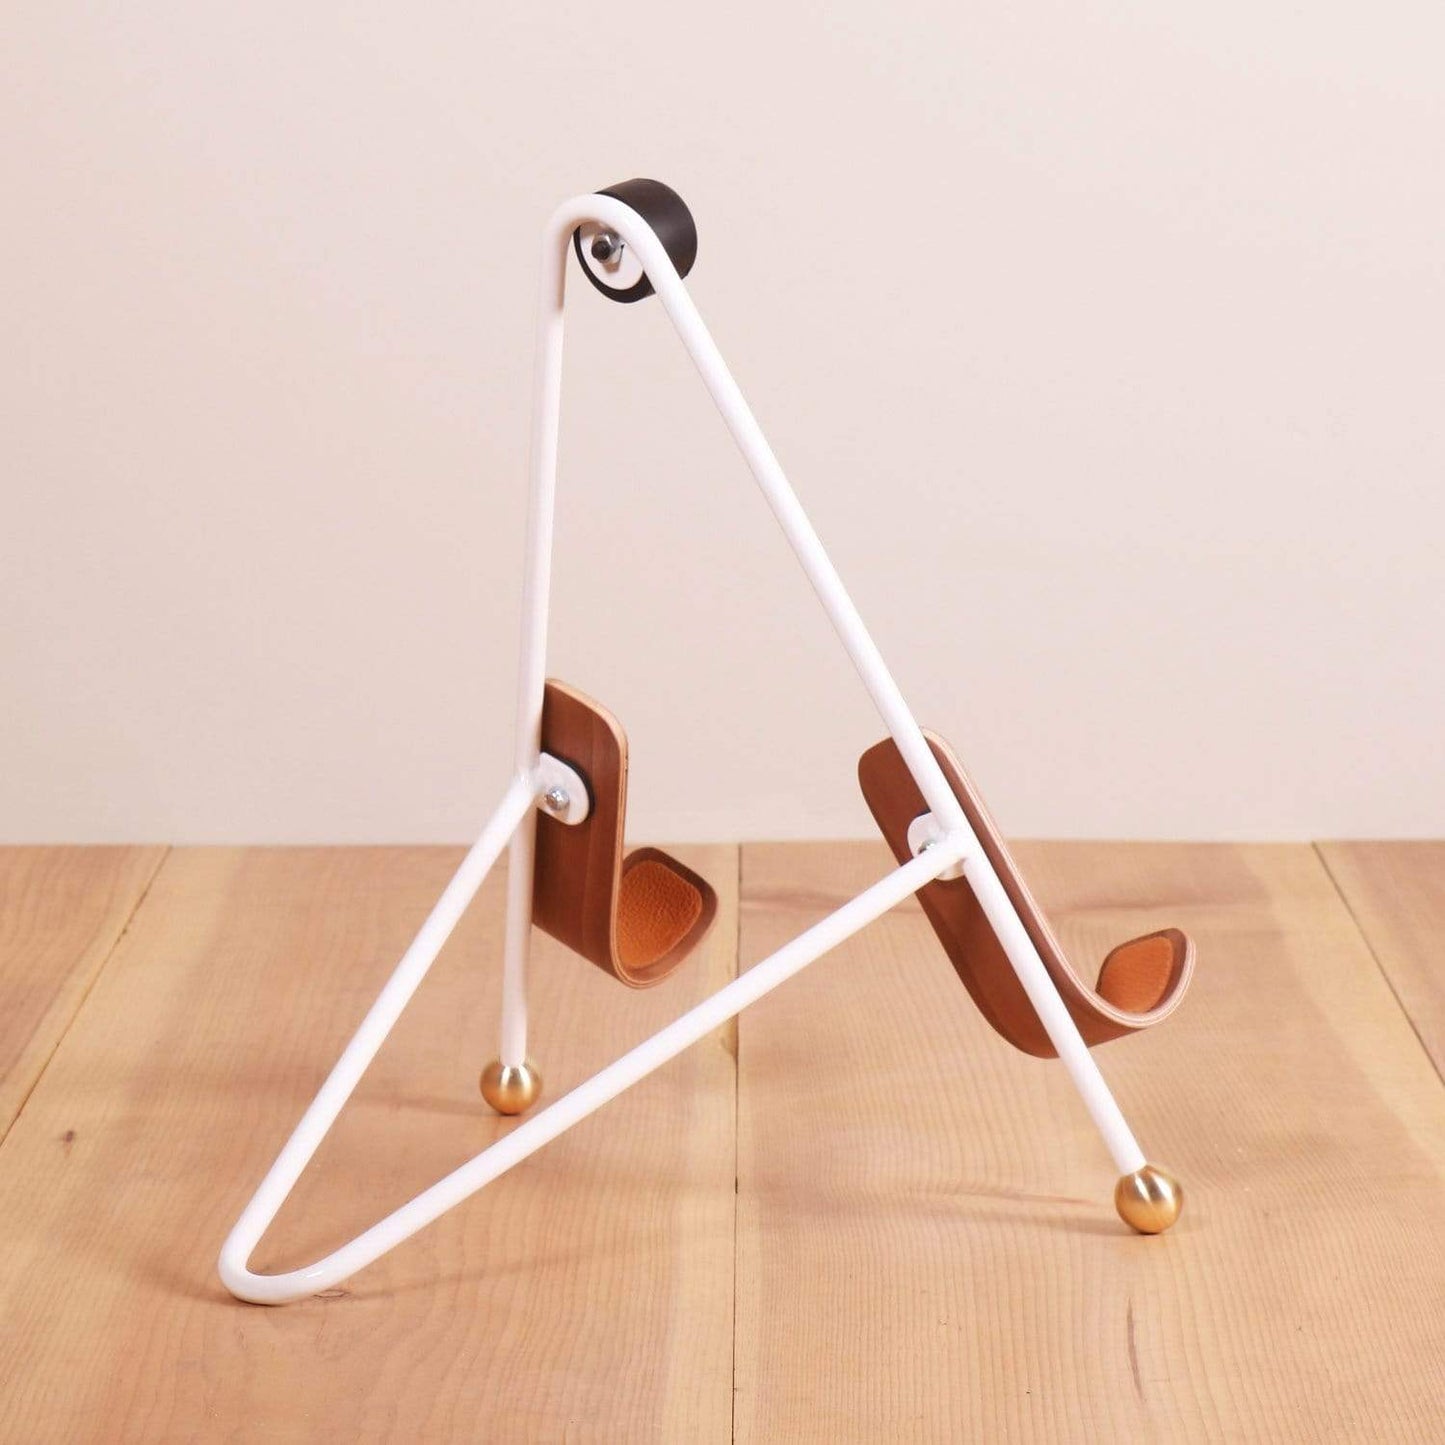 Guitar Stand - Electric